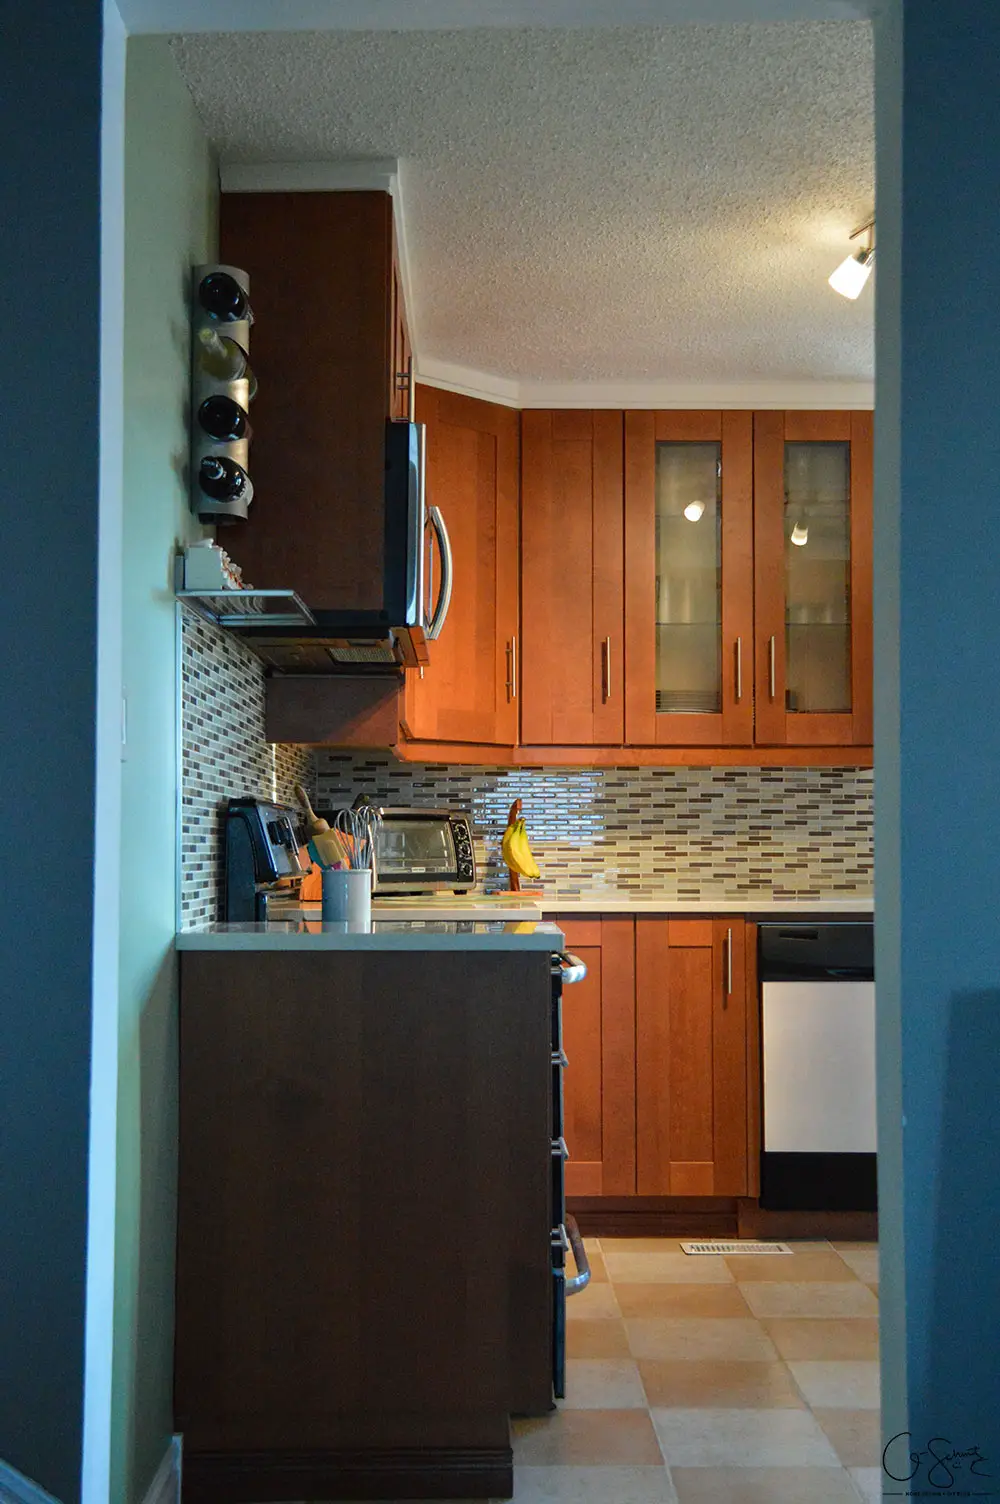 The before and after photo reveal of our DIY kitchen renovation. Check out all the great features we added to make this space unique. I can’t believe what it used to look like!